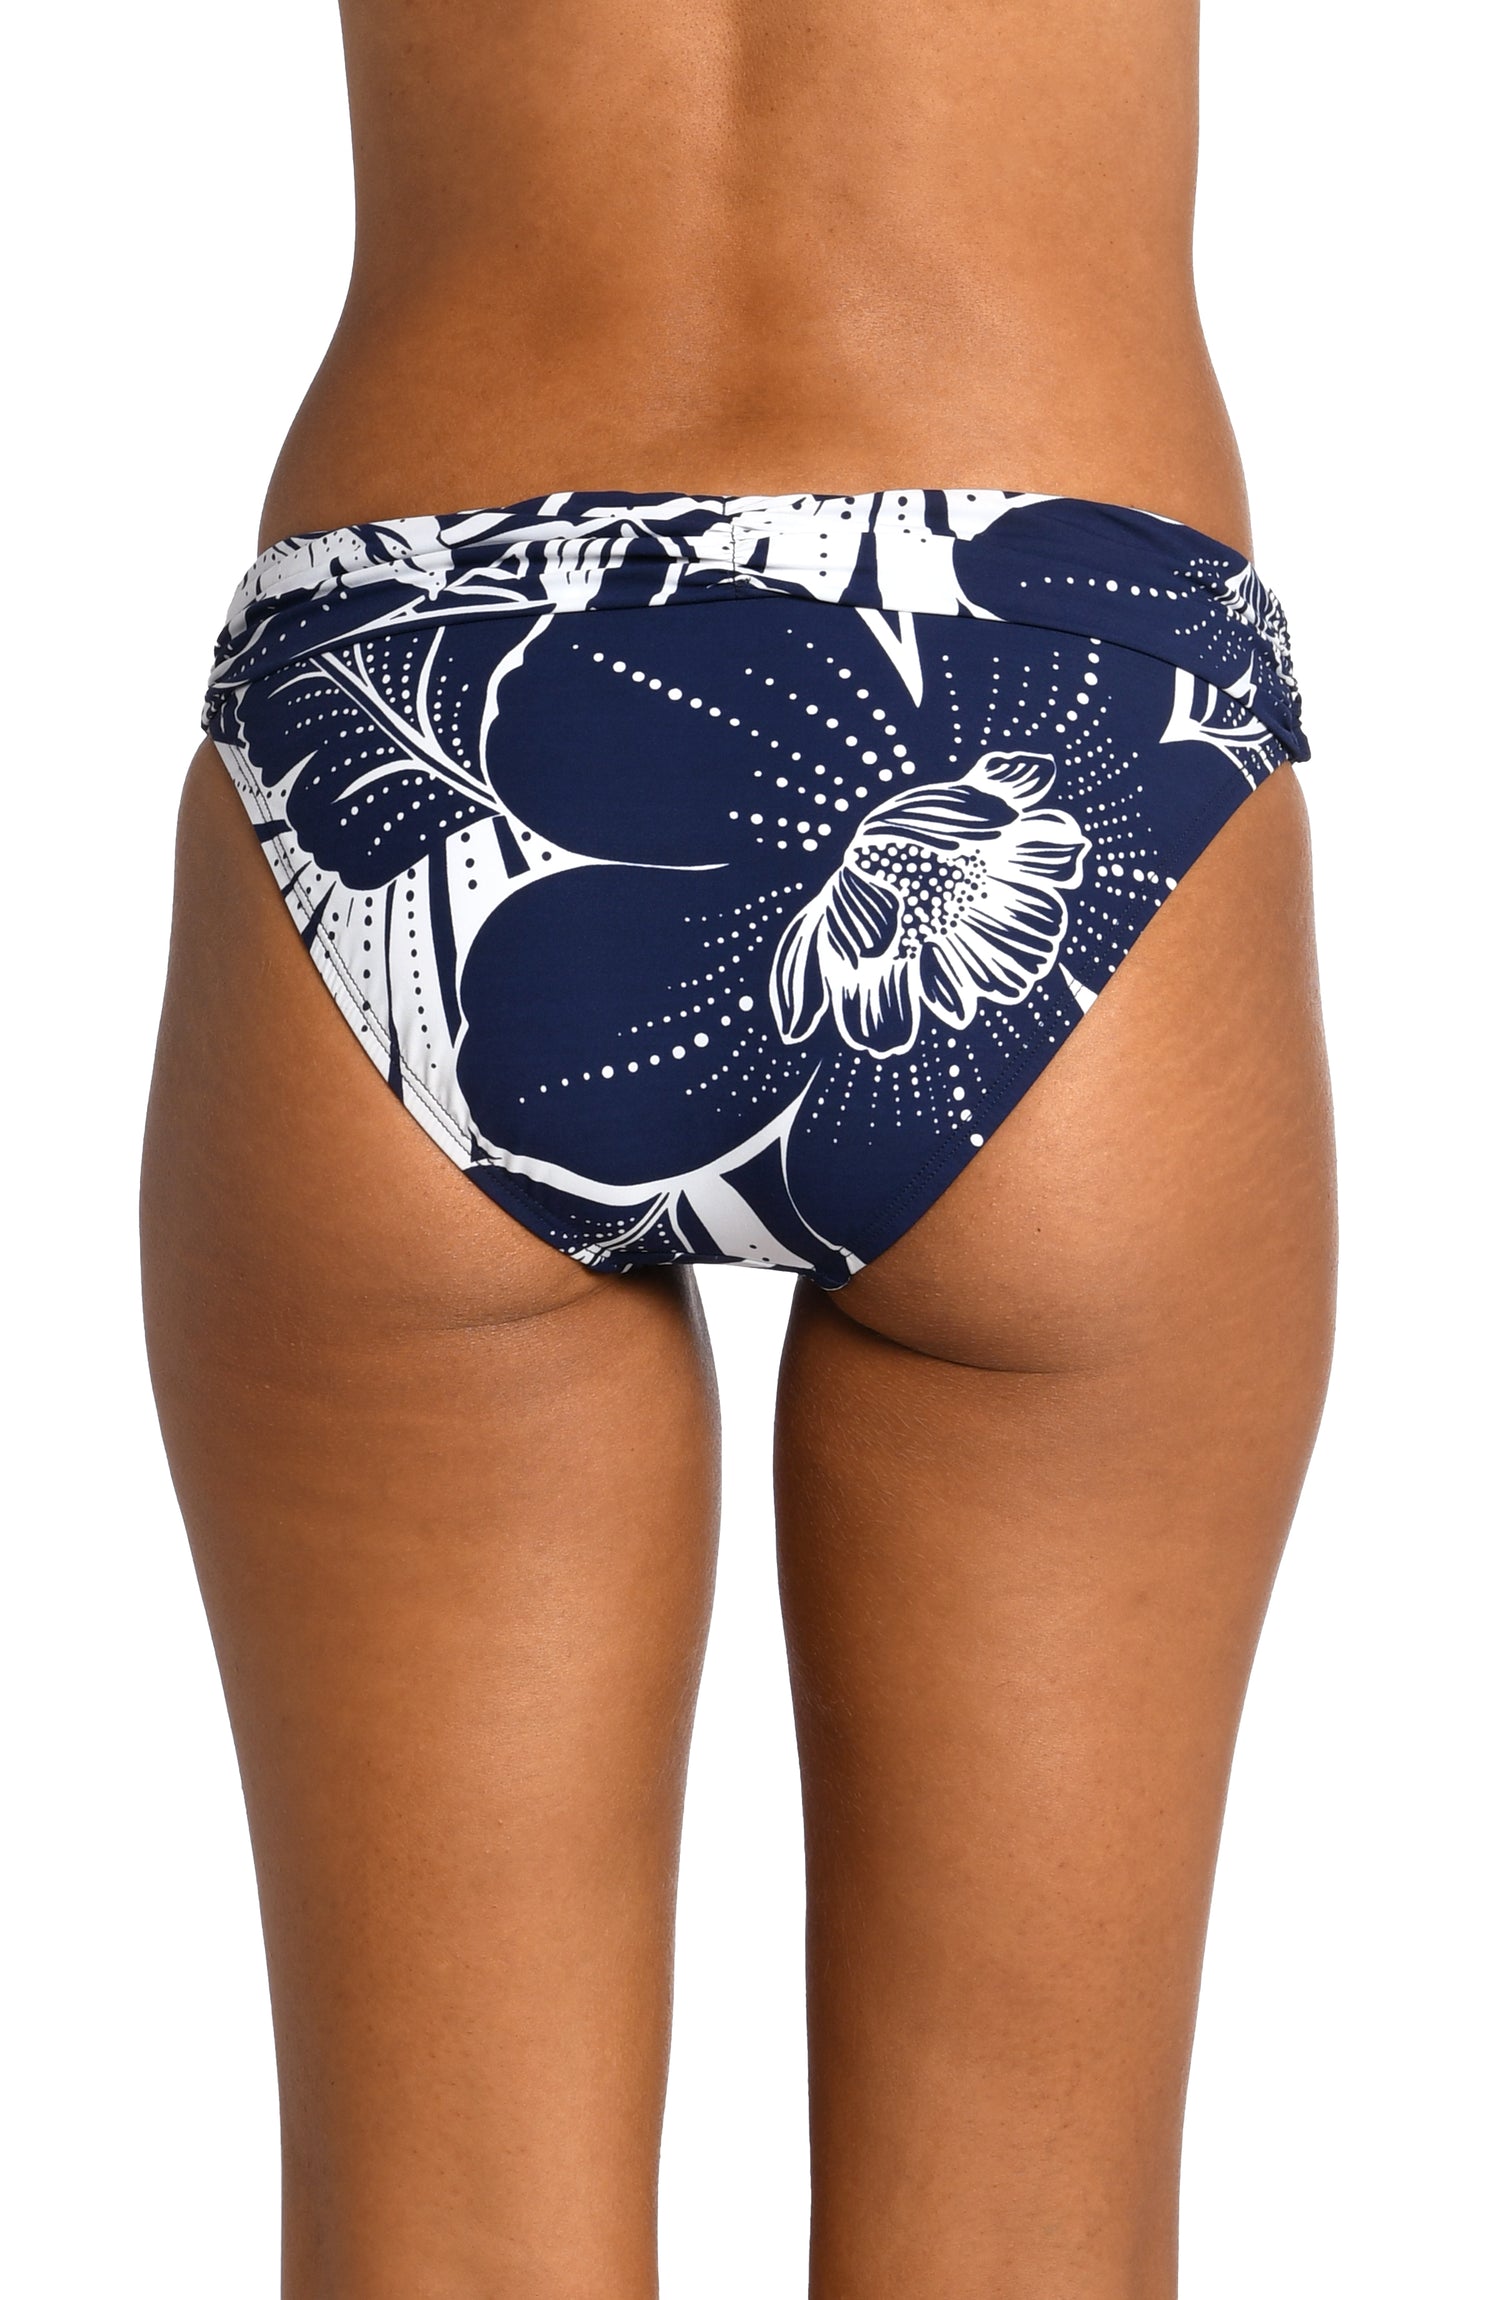 Model is wearing an indigo colored print with pops of white on shirred band hipster bottom from our At the Playa collection!